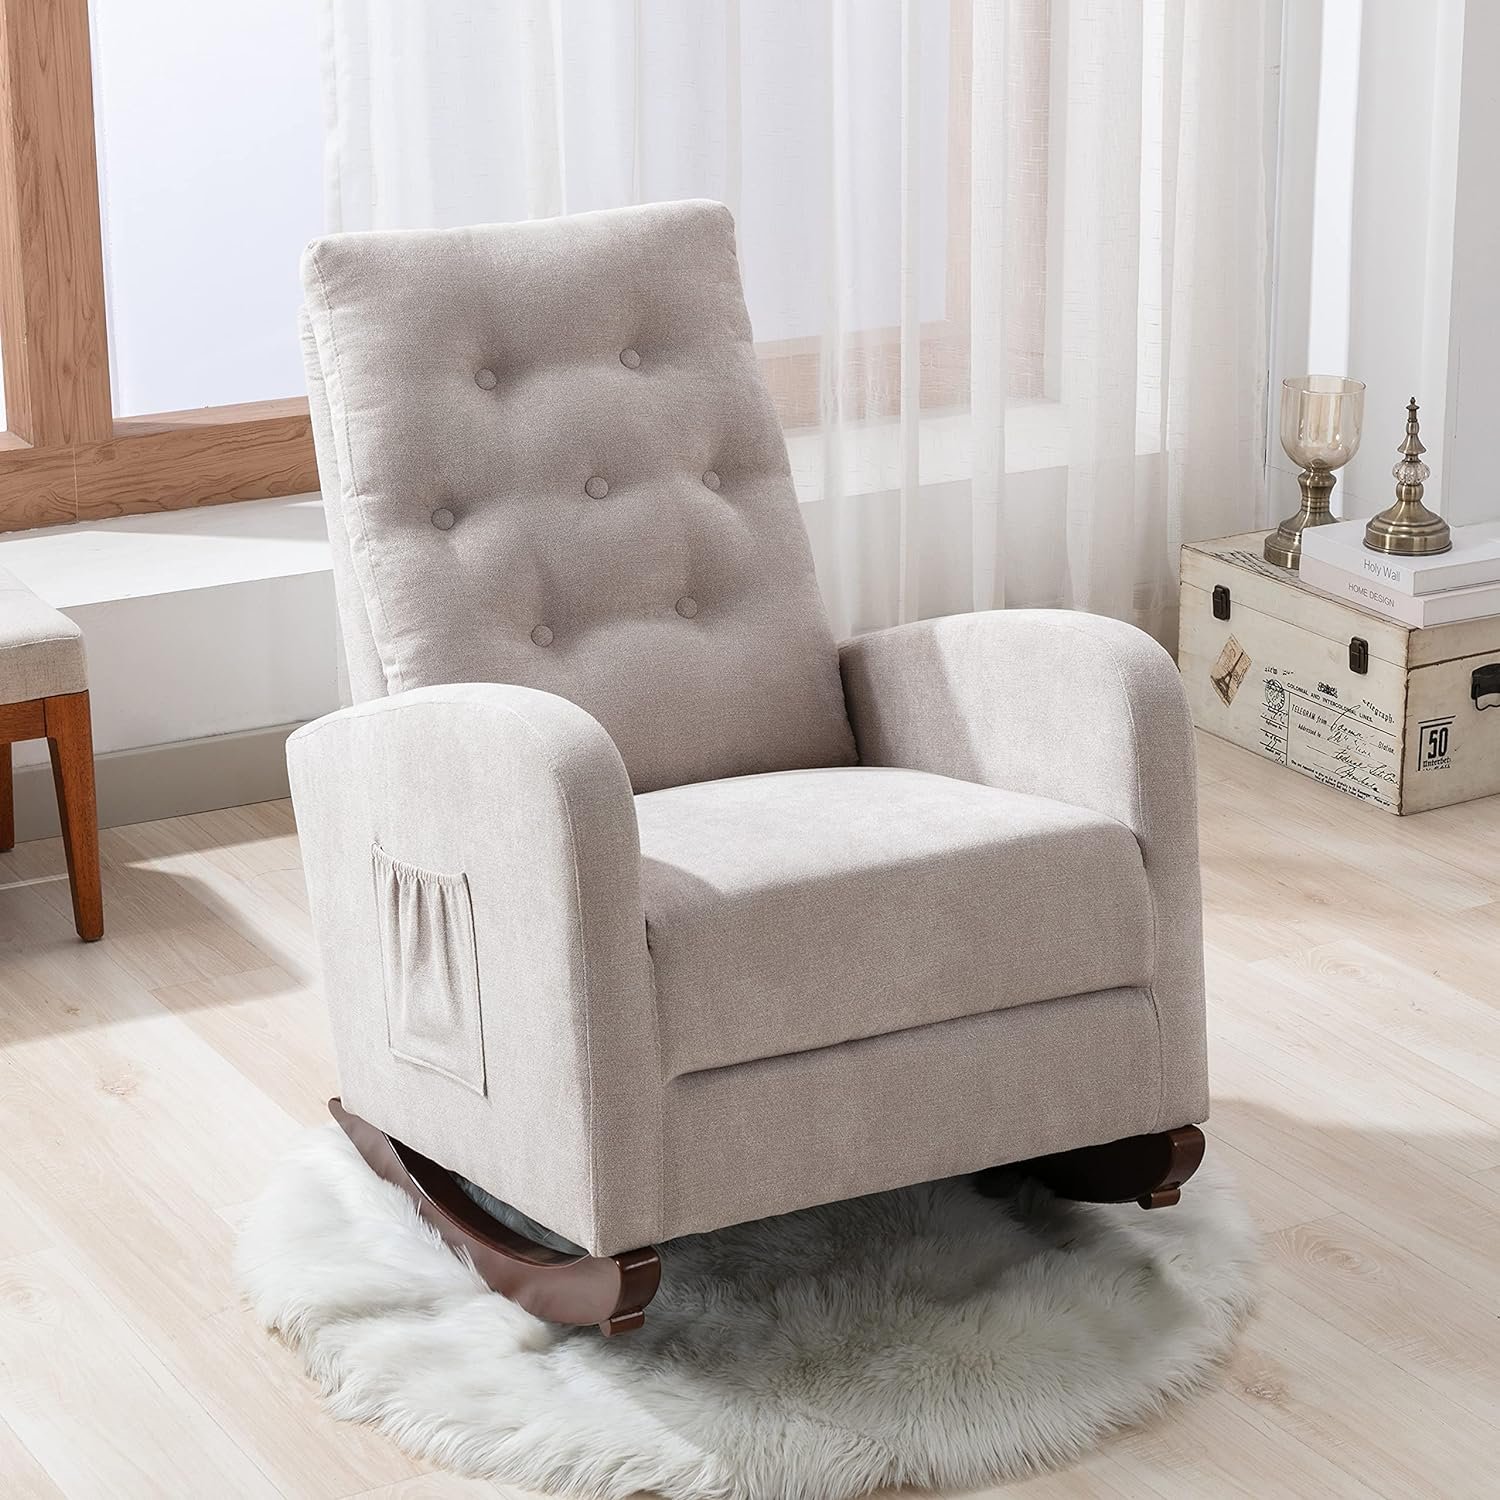 Morhome Tufted Modern Accent Rocking Chair, Upholstered Nursery Glider Rocker for Baby and Kids, Comfy Armchair with Pocket and High Backrest, Tan-C